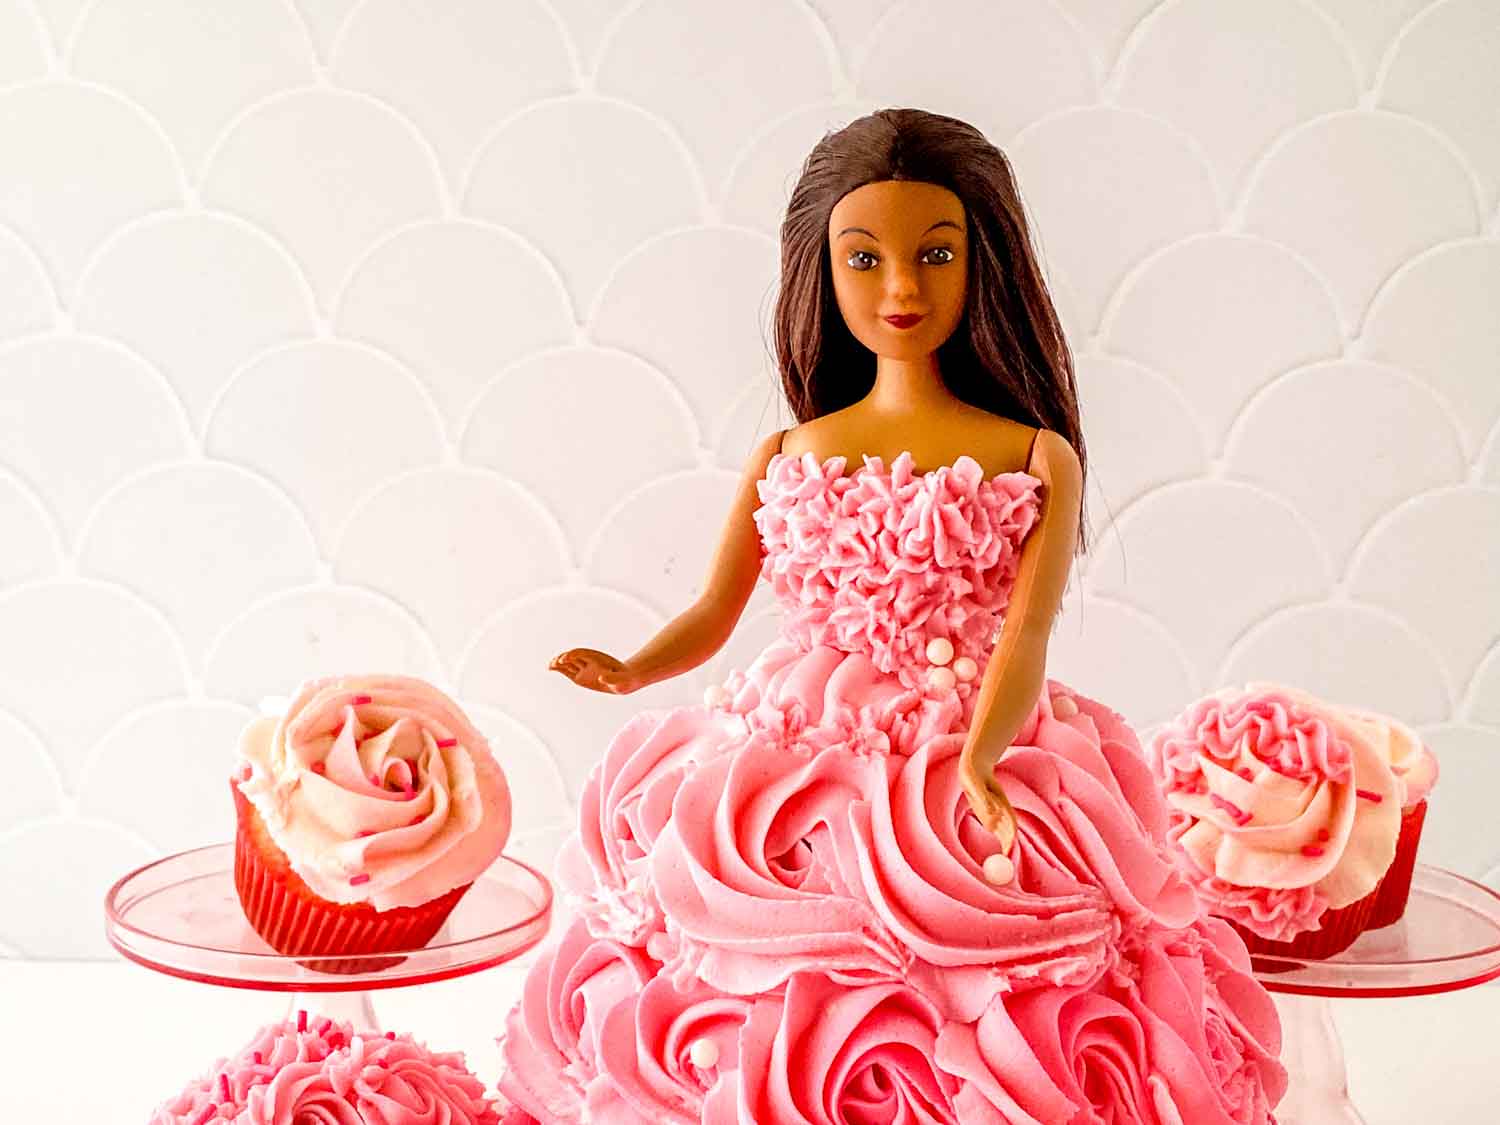 Pink Barbie Drip Cake perfect for a Barbie Girl! - The Baking Factory